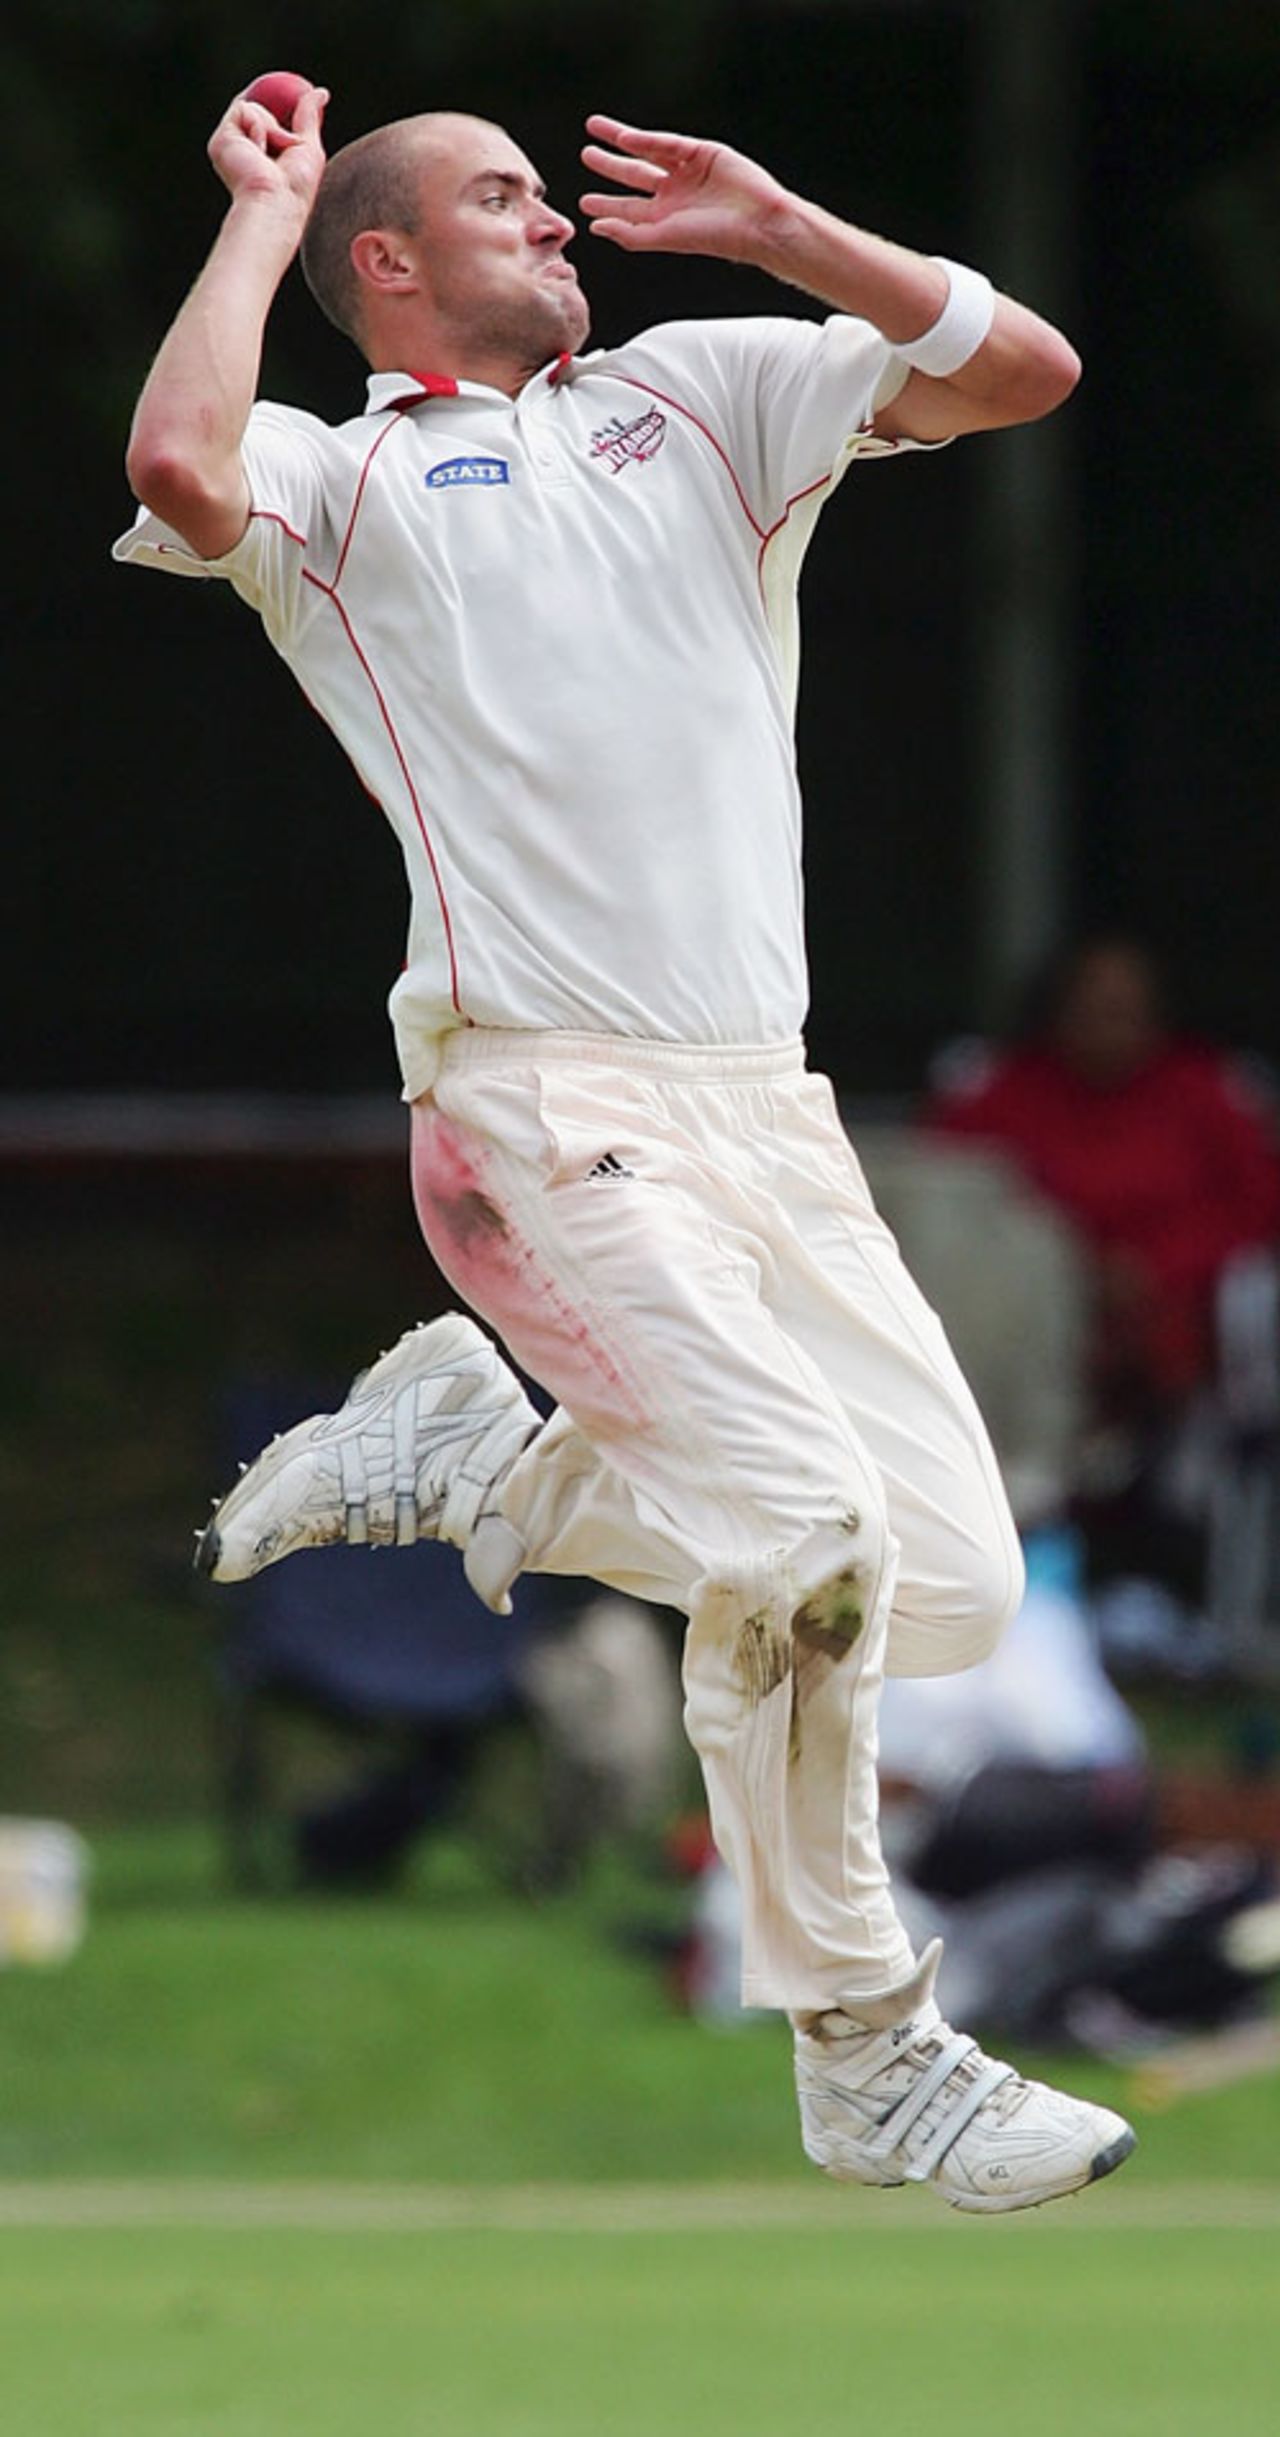 Leighton Burtt in his delivery stride,  Auckland v Canterbury, State Championship, Eden Park, March 24, 2008